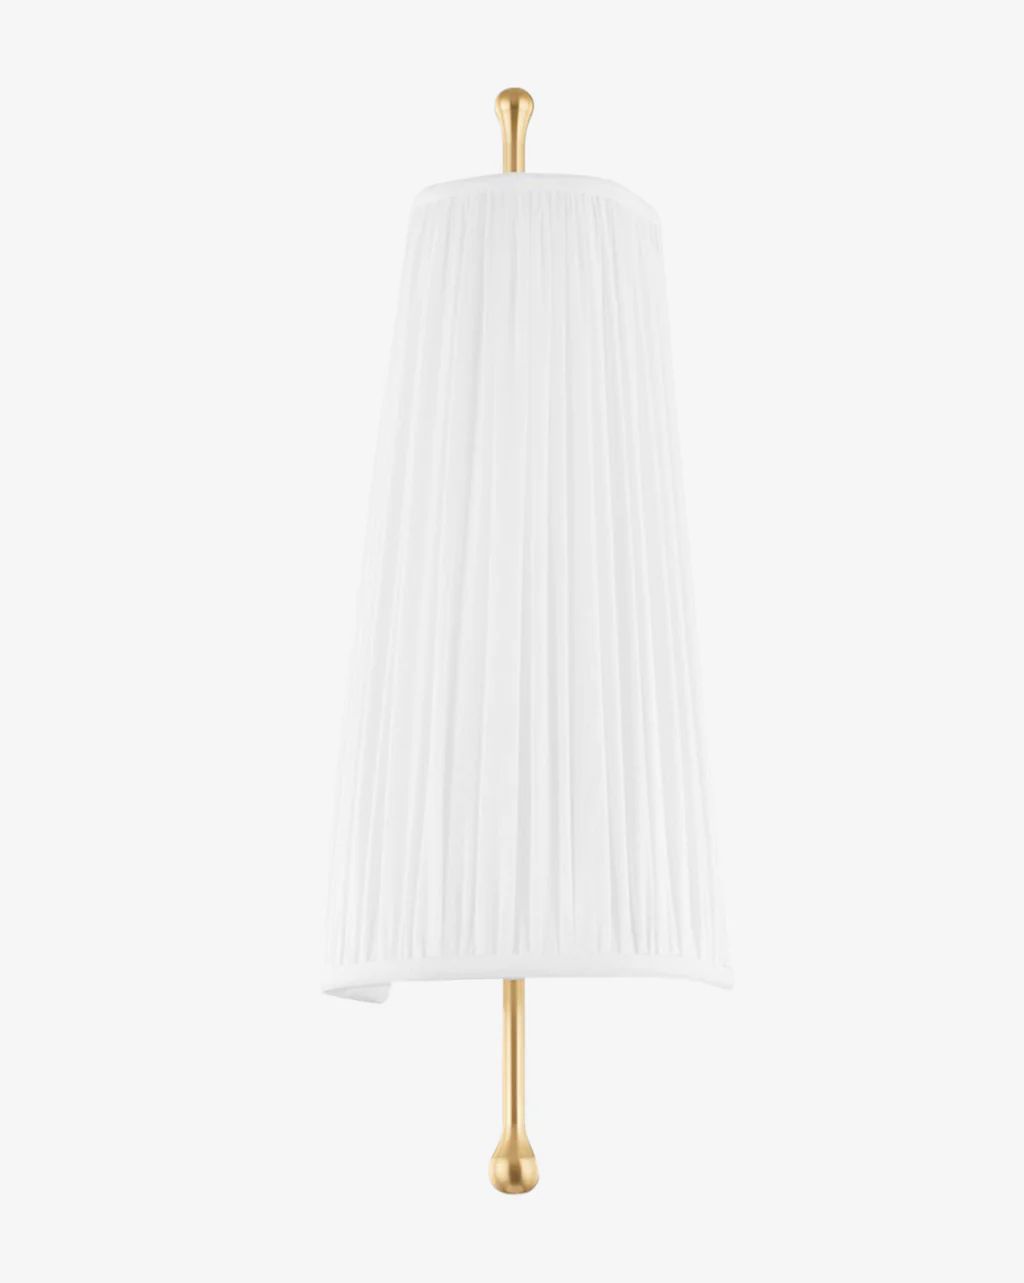 Adeline Wall Sconce | McGee & Co.